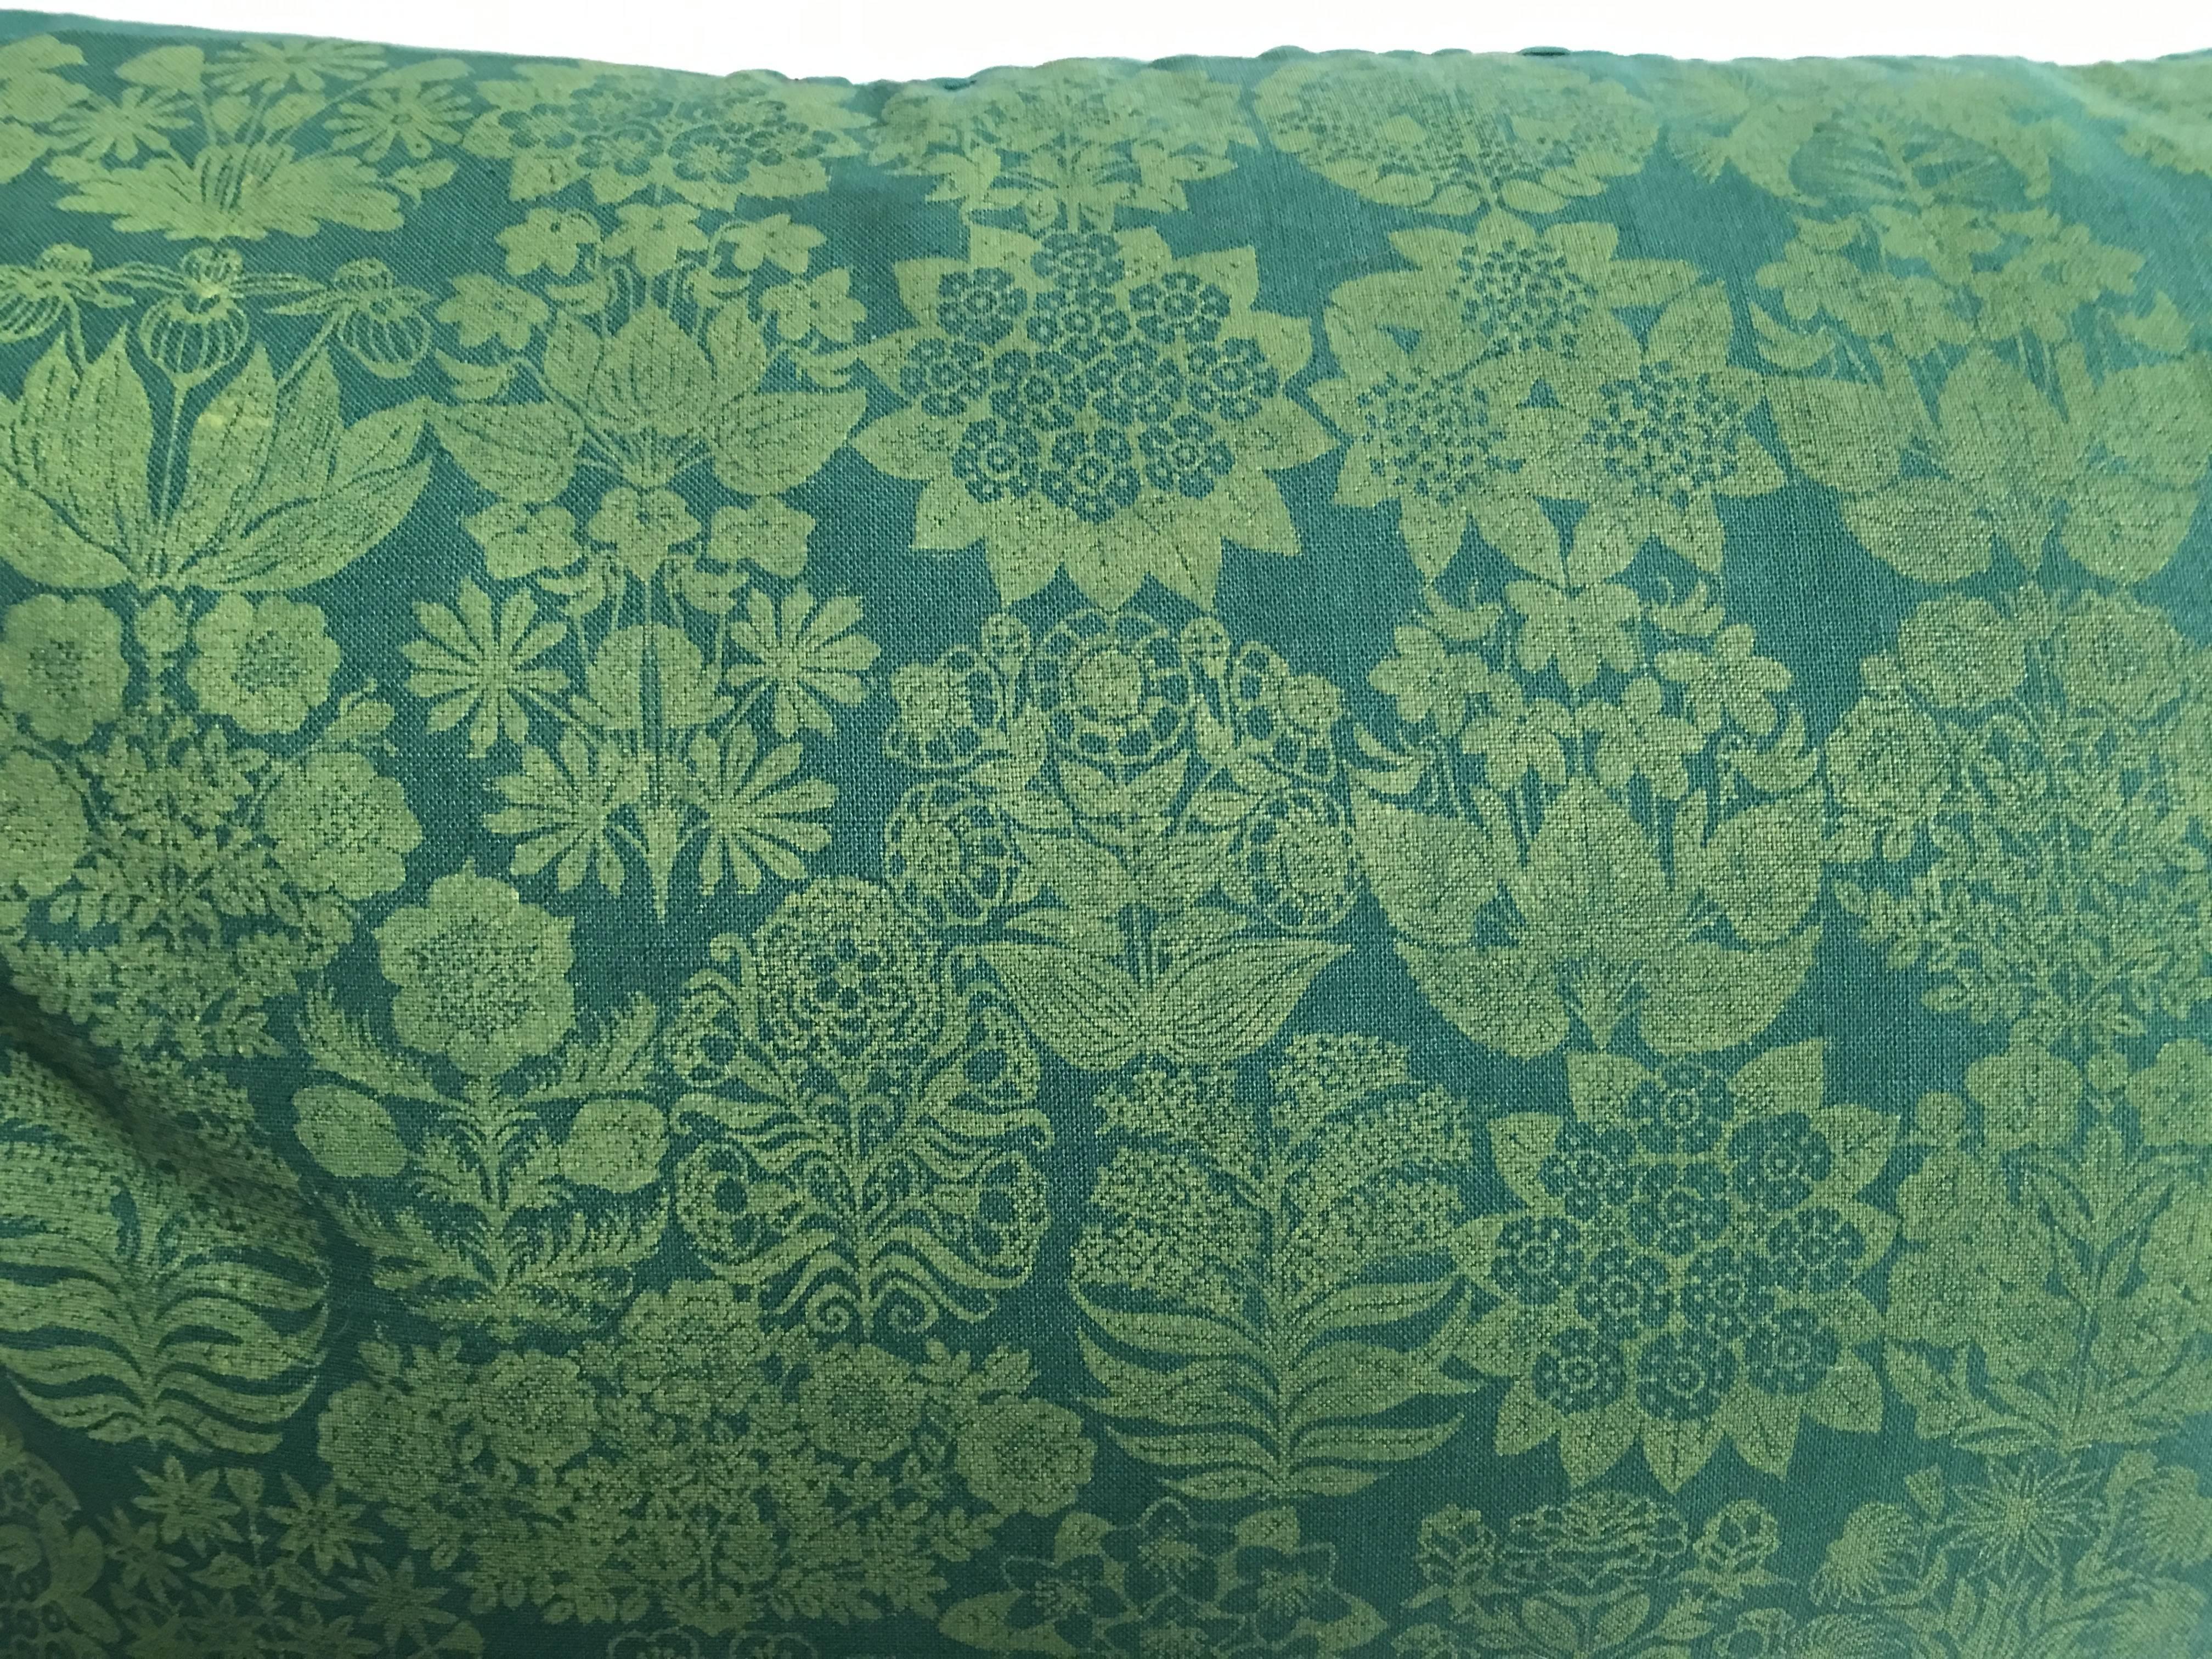 An original hand block printed folly cove designers fabric pillow, in green on green, in the Garland of the States pattern by Louise Kenyon, circa 1959, with the state flowers of what were then 49 states (just before Hawaii became a state) in the